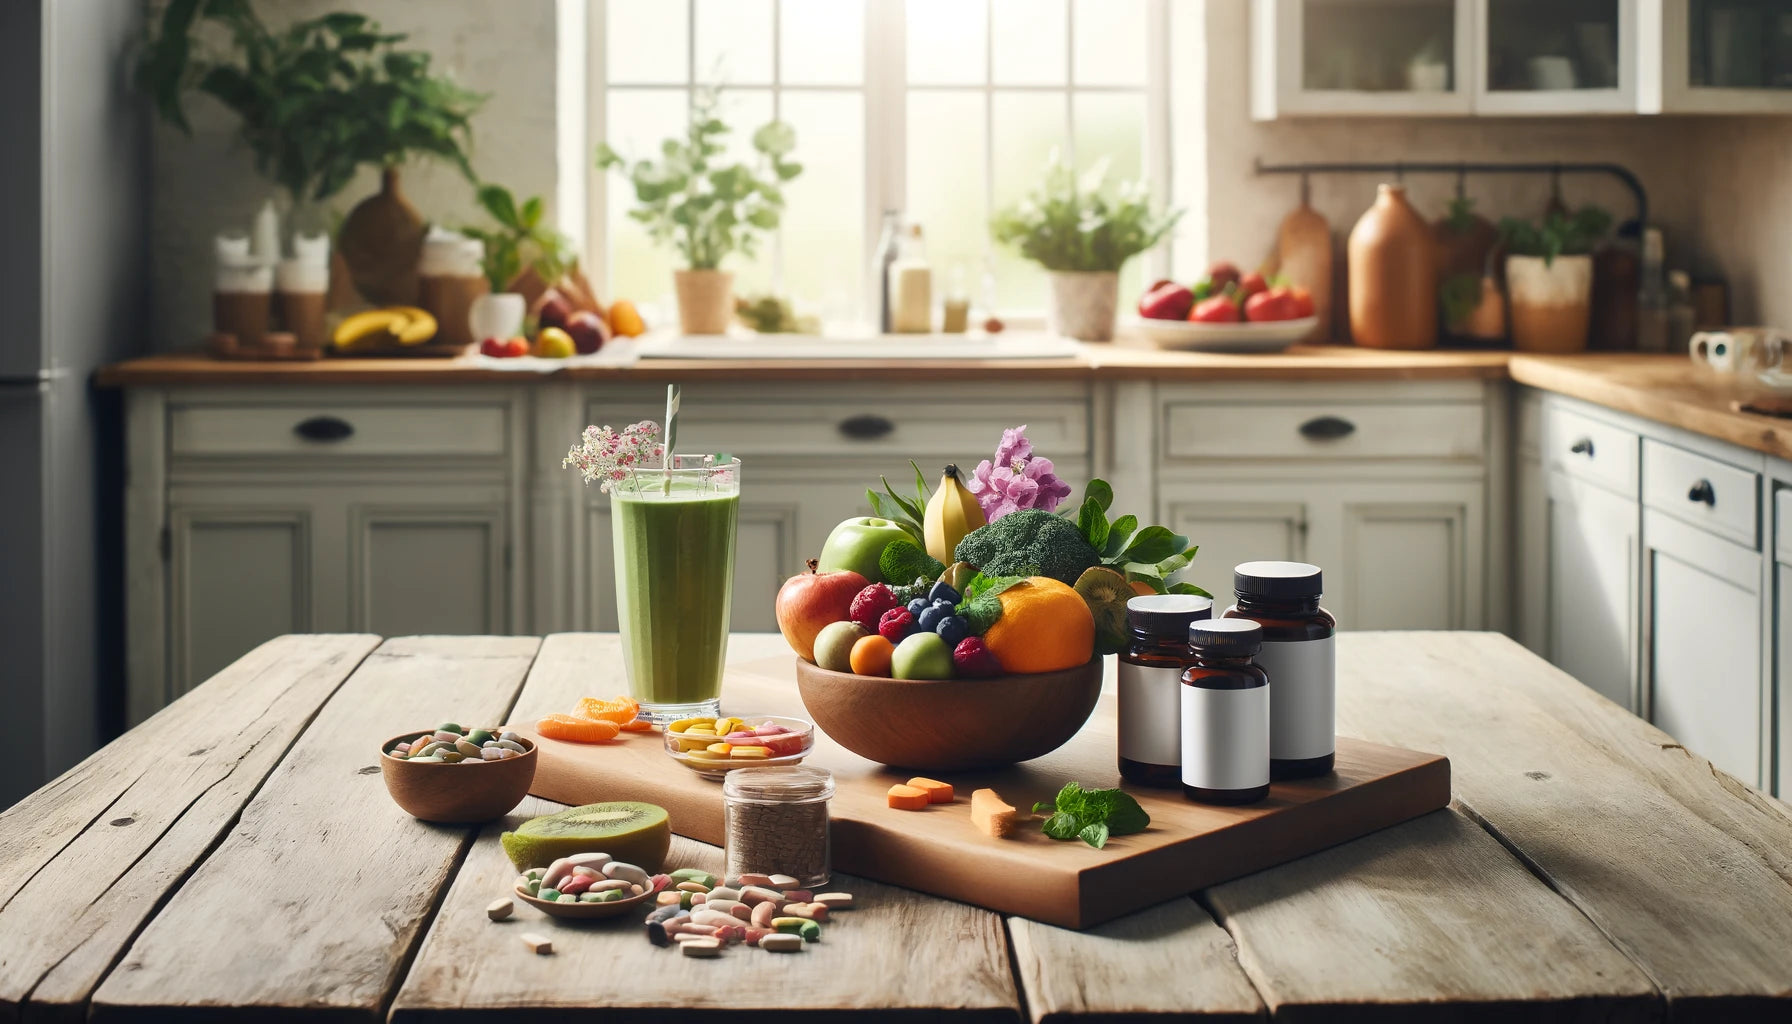 Healthy kitchen setup with nutritious foods and supplements for post-surgery recovery